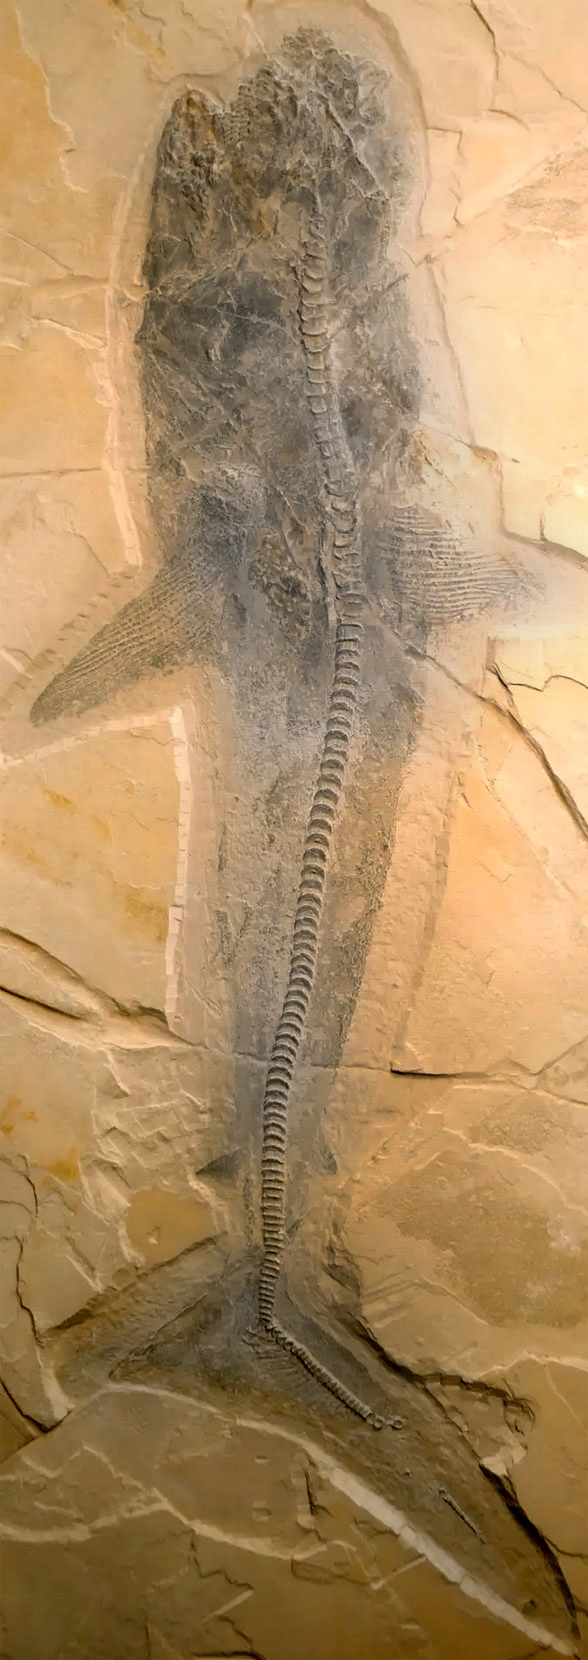 Figure 2. Ptychodus fossil from theguardian.com. This one is different from the one stolen and recovered.